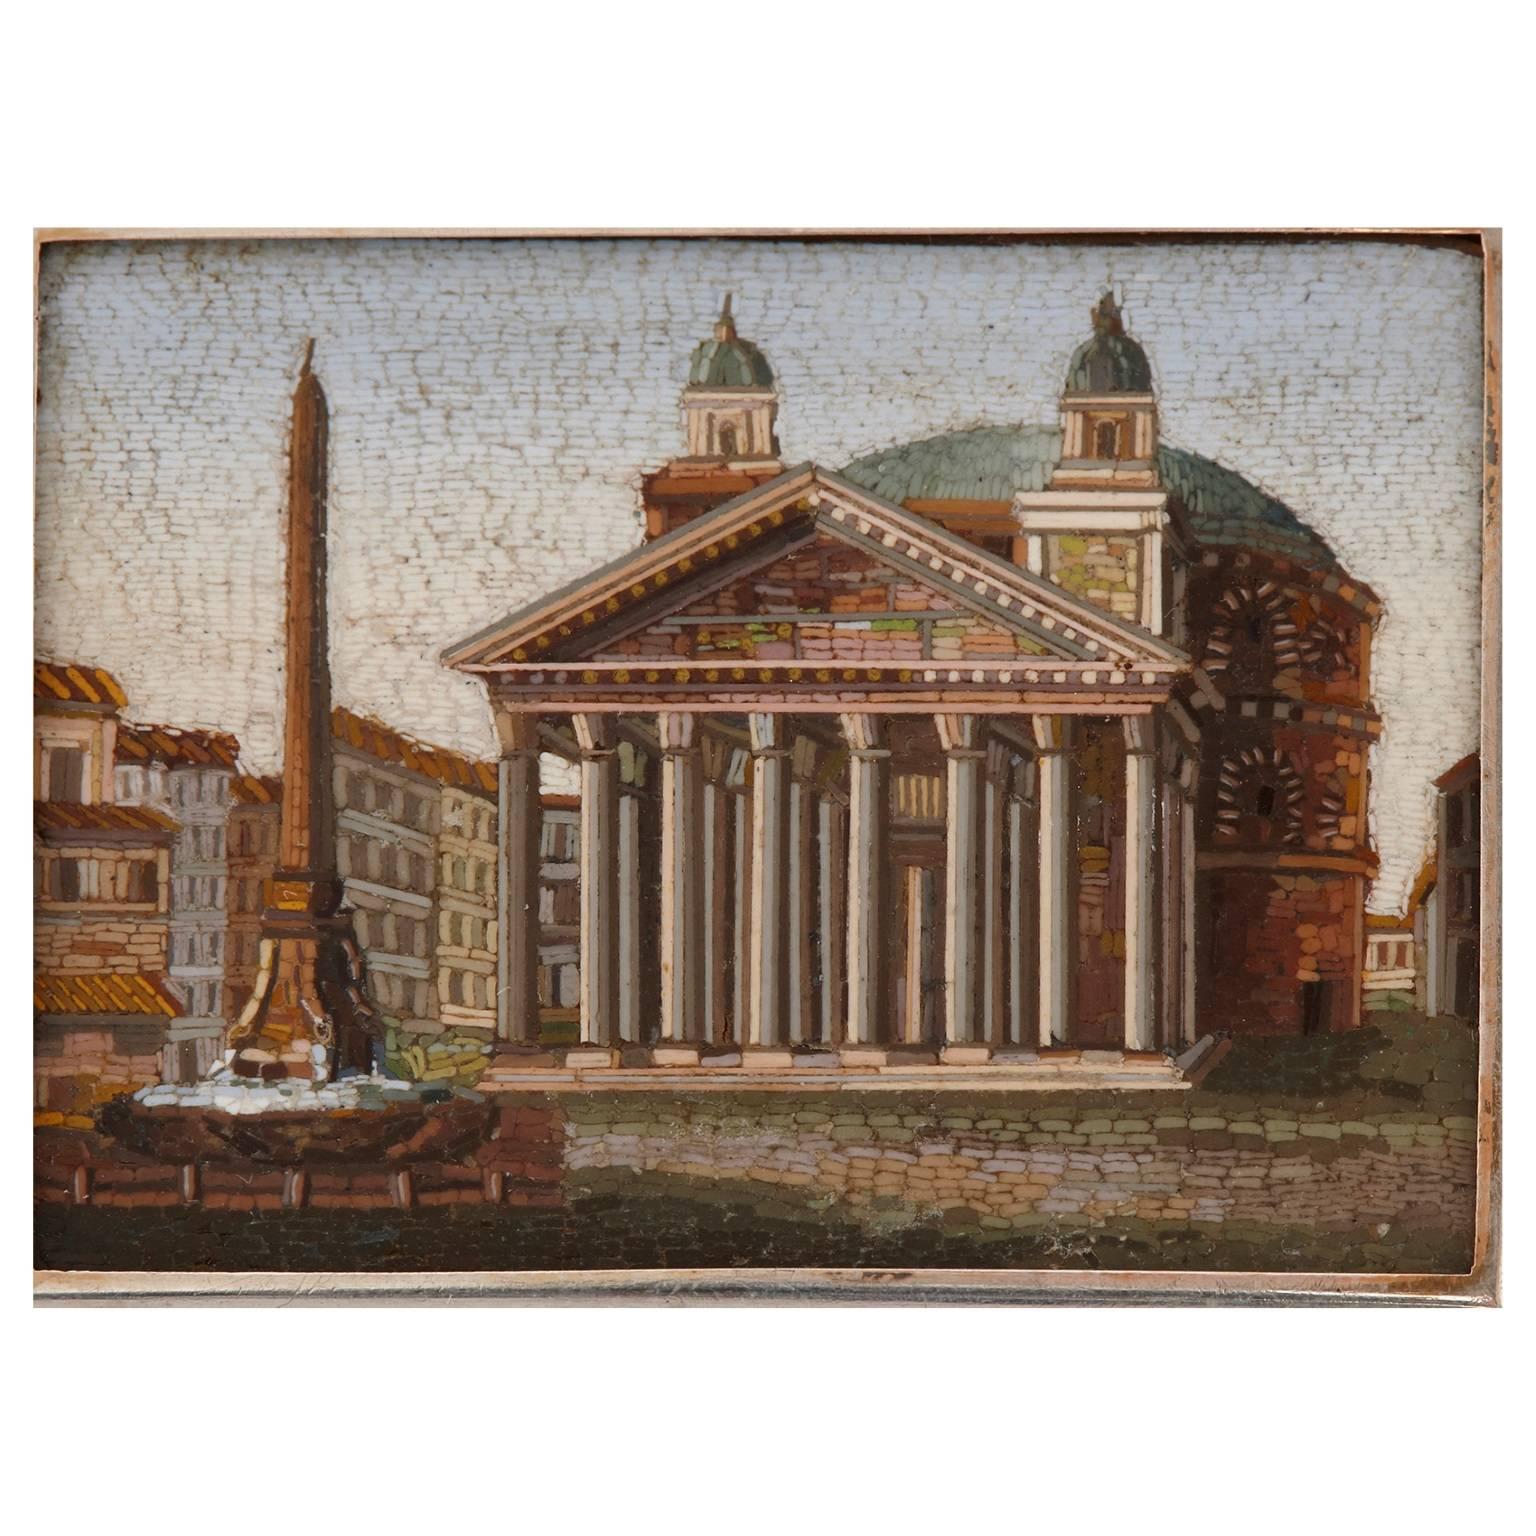 This exquisite antique Italian micro-mosaic plaque depicts the Piazza della Rotunda in Rome, with the Pantheon at its centre. The portrayal is particularly important, as it shows the Pantheon as having twin bell towers, which were removed from the